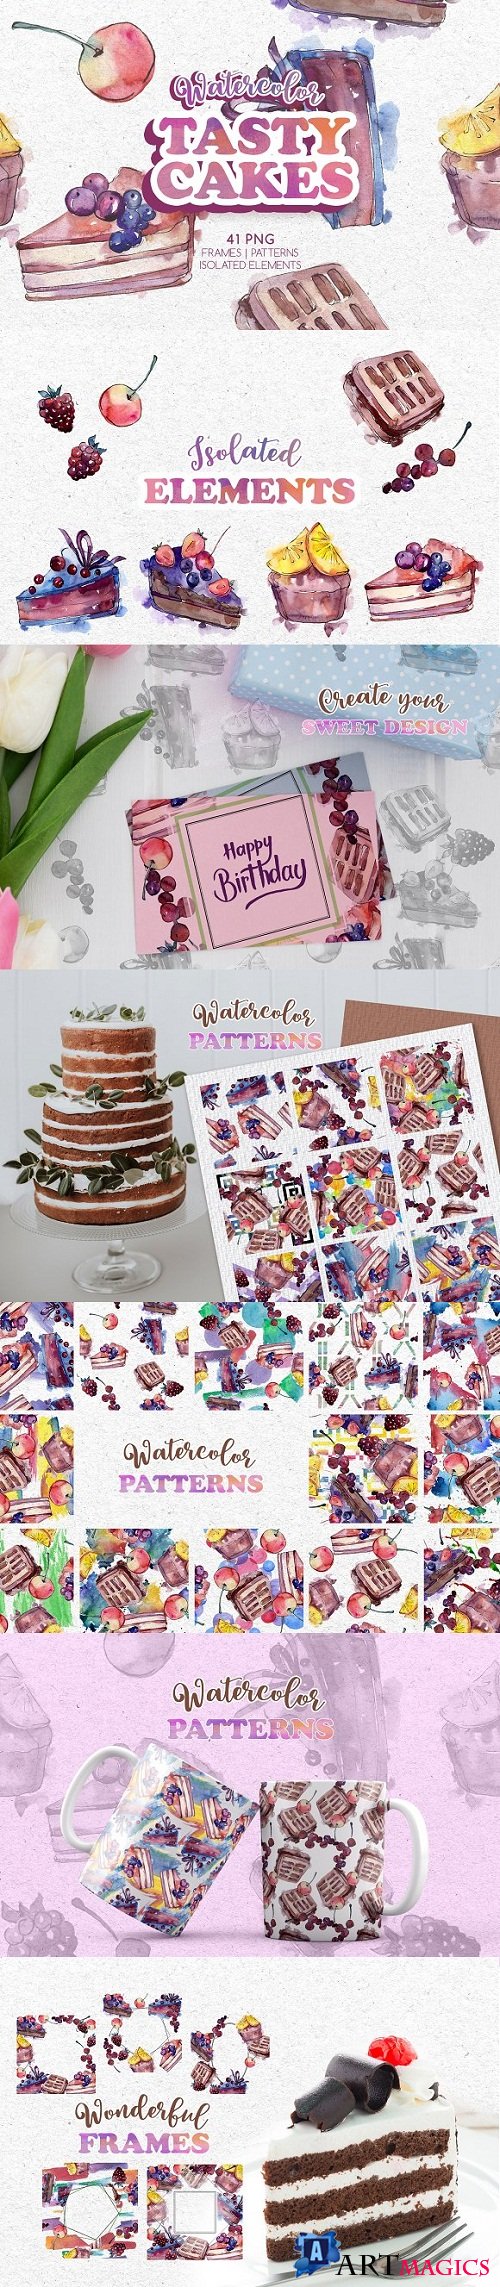 Tasty cakes Watercolor png - 3522468